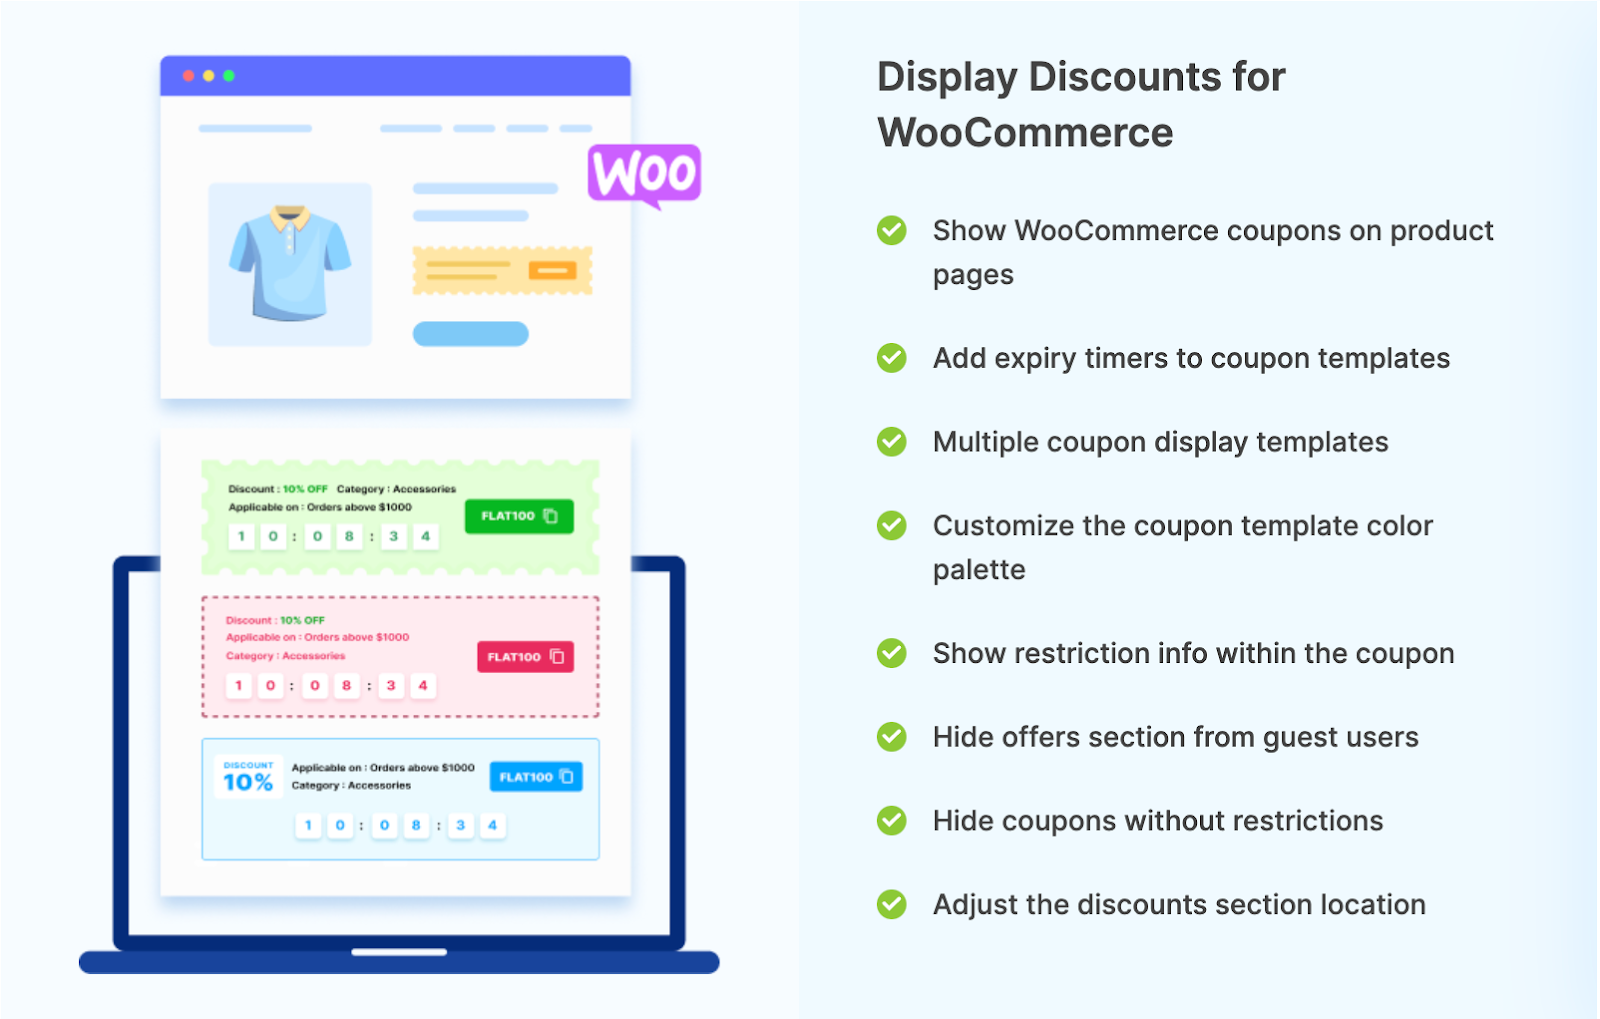 2. Display Discounts for WooCommerce